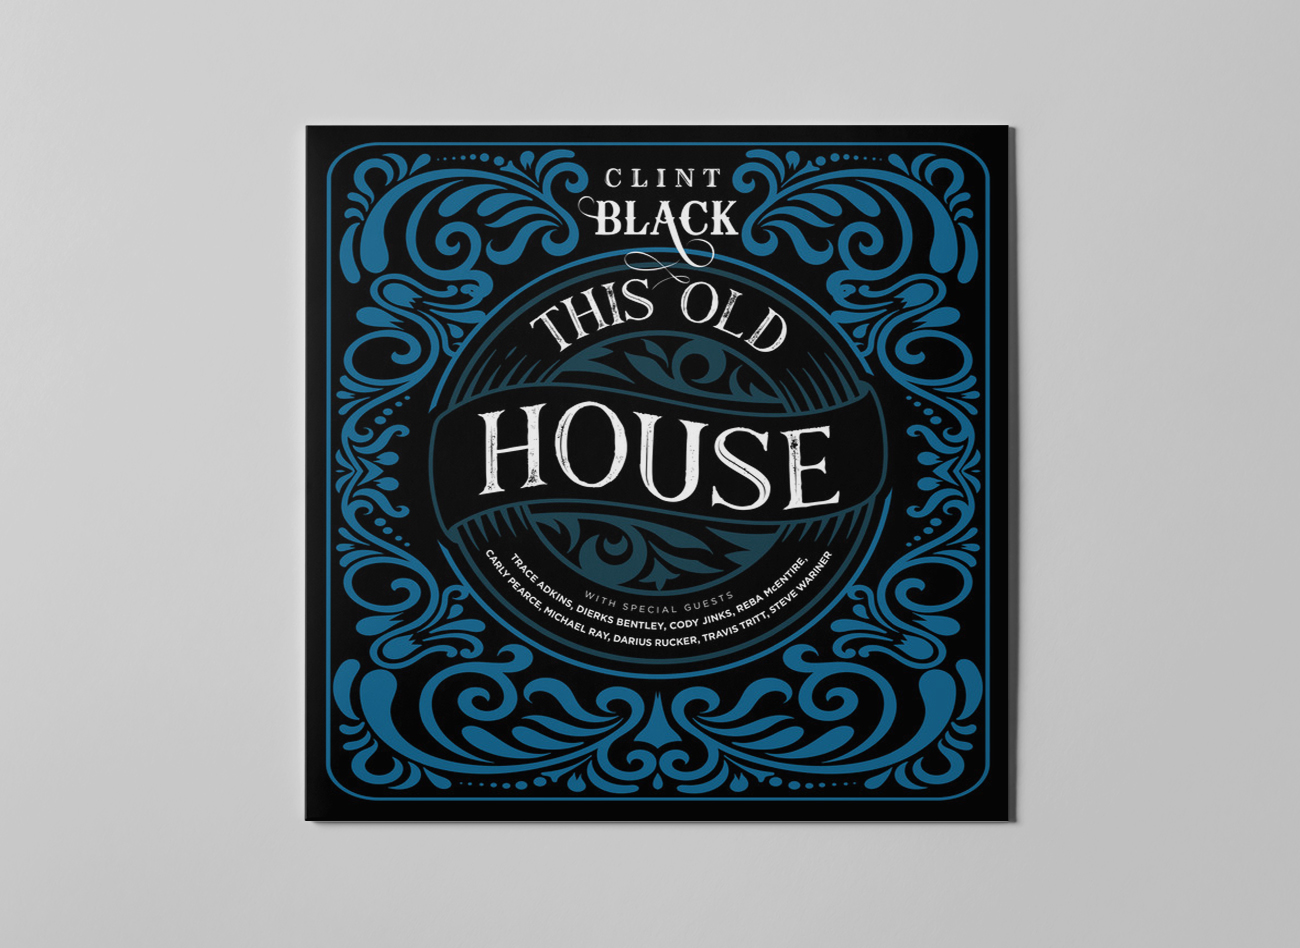 Clint Black This Old House